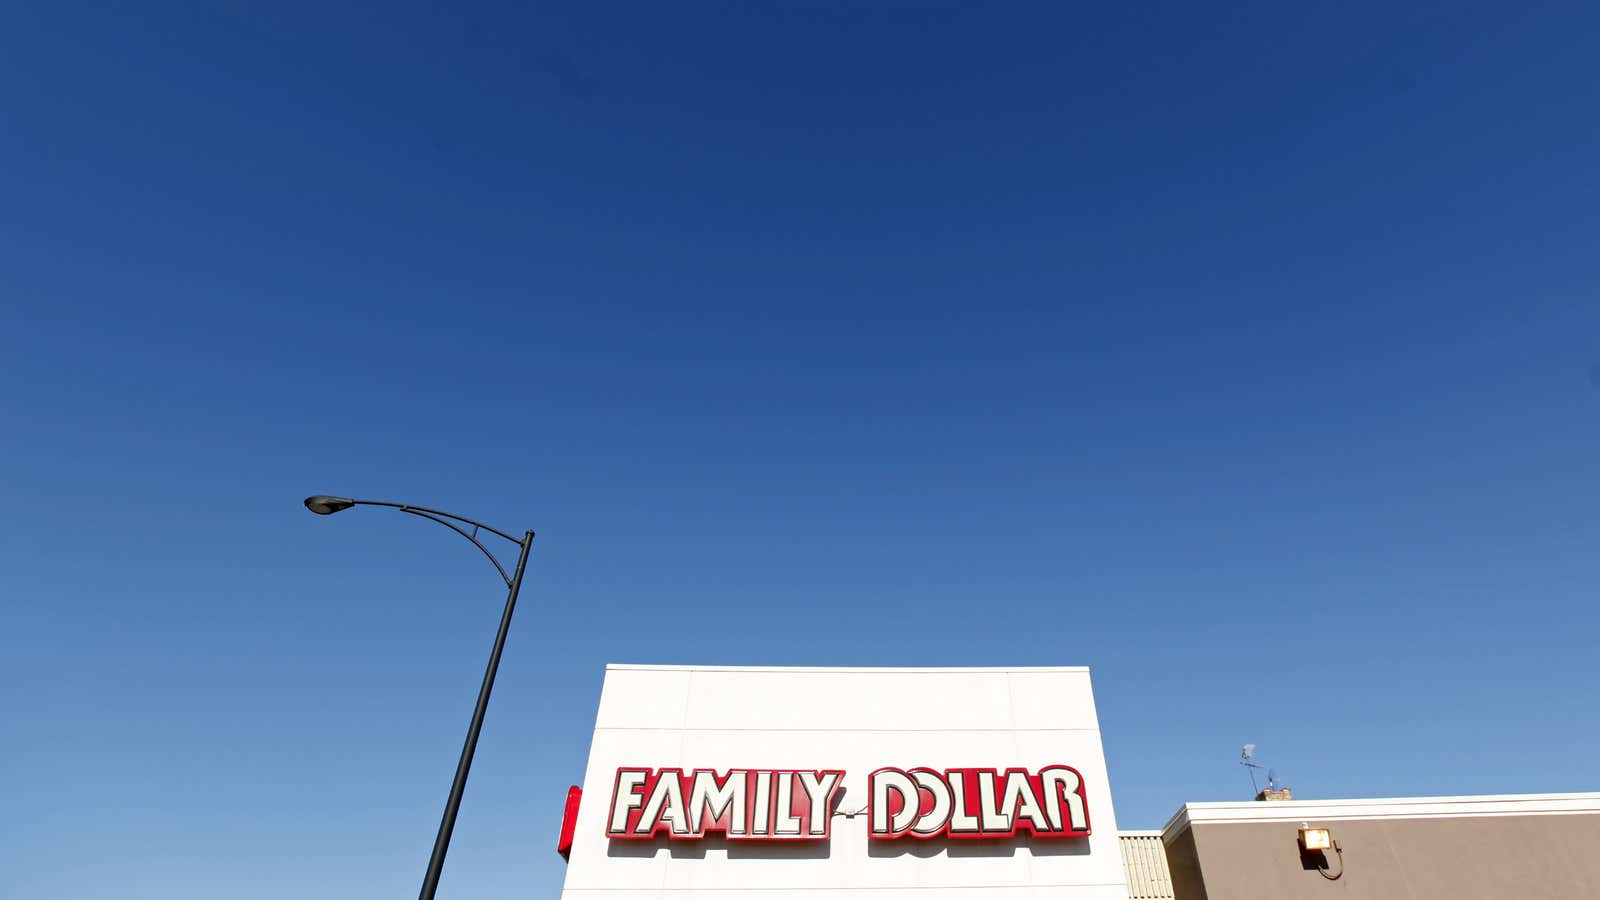 For low-income Americans, even shopping at Family Dollar can feel like an uphill climb.